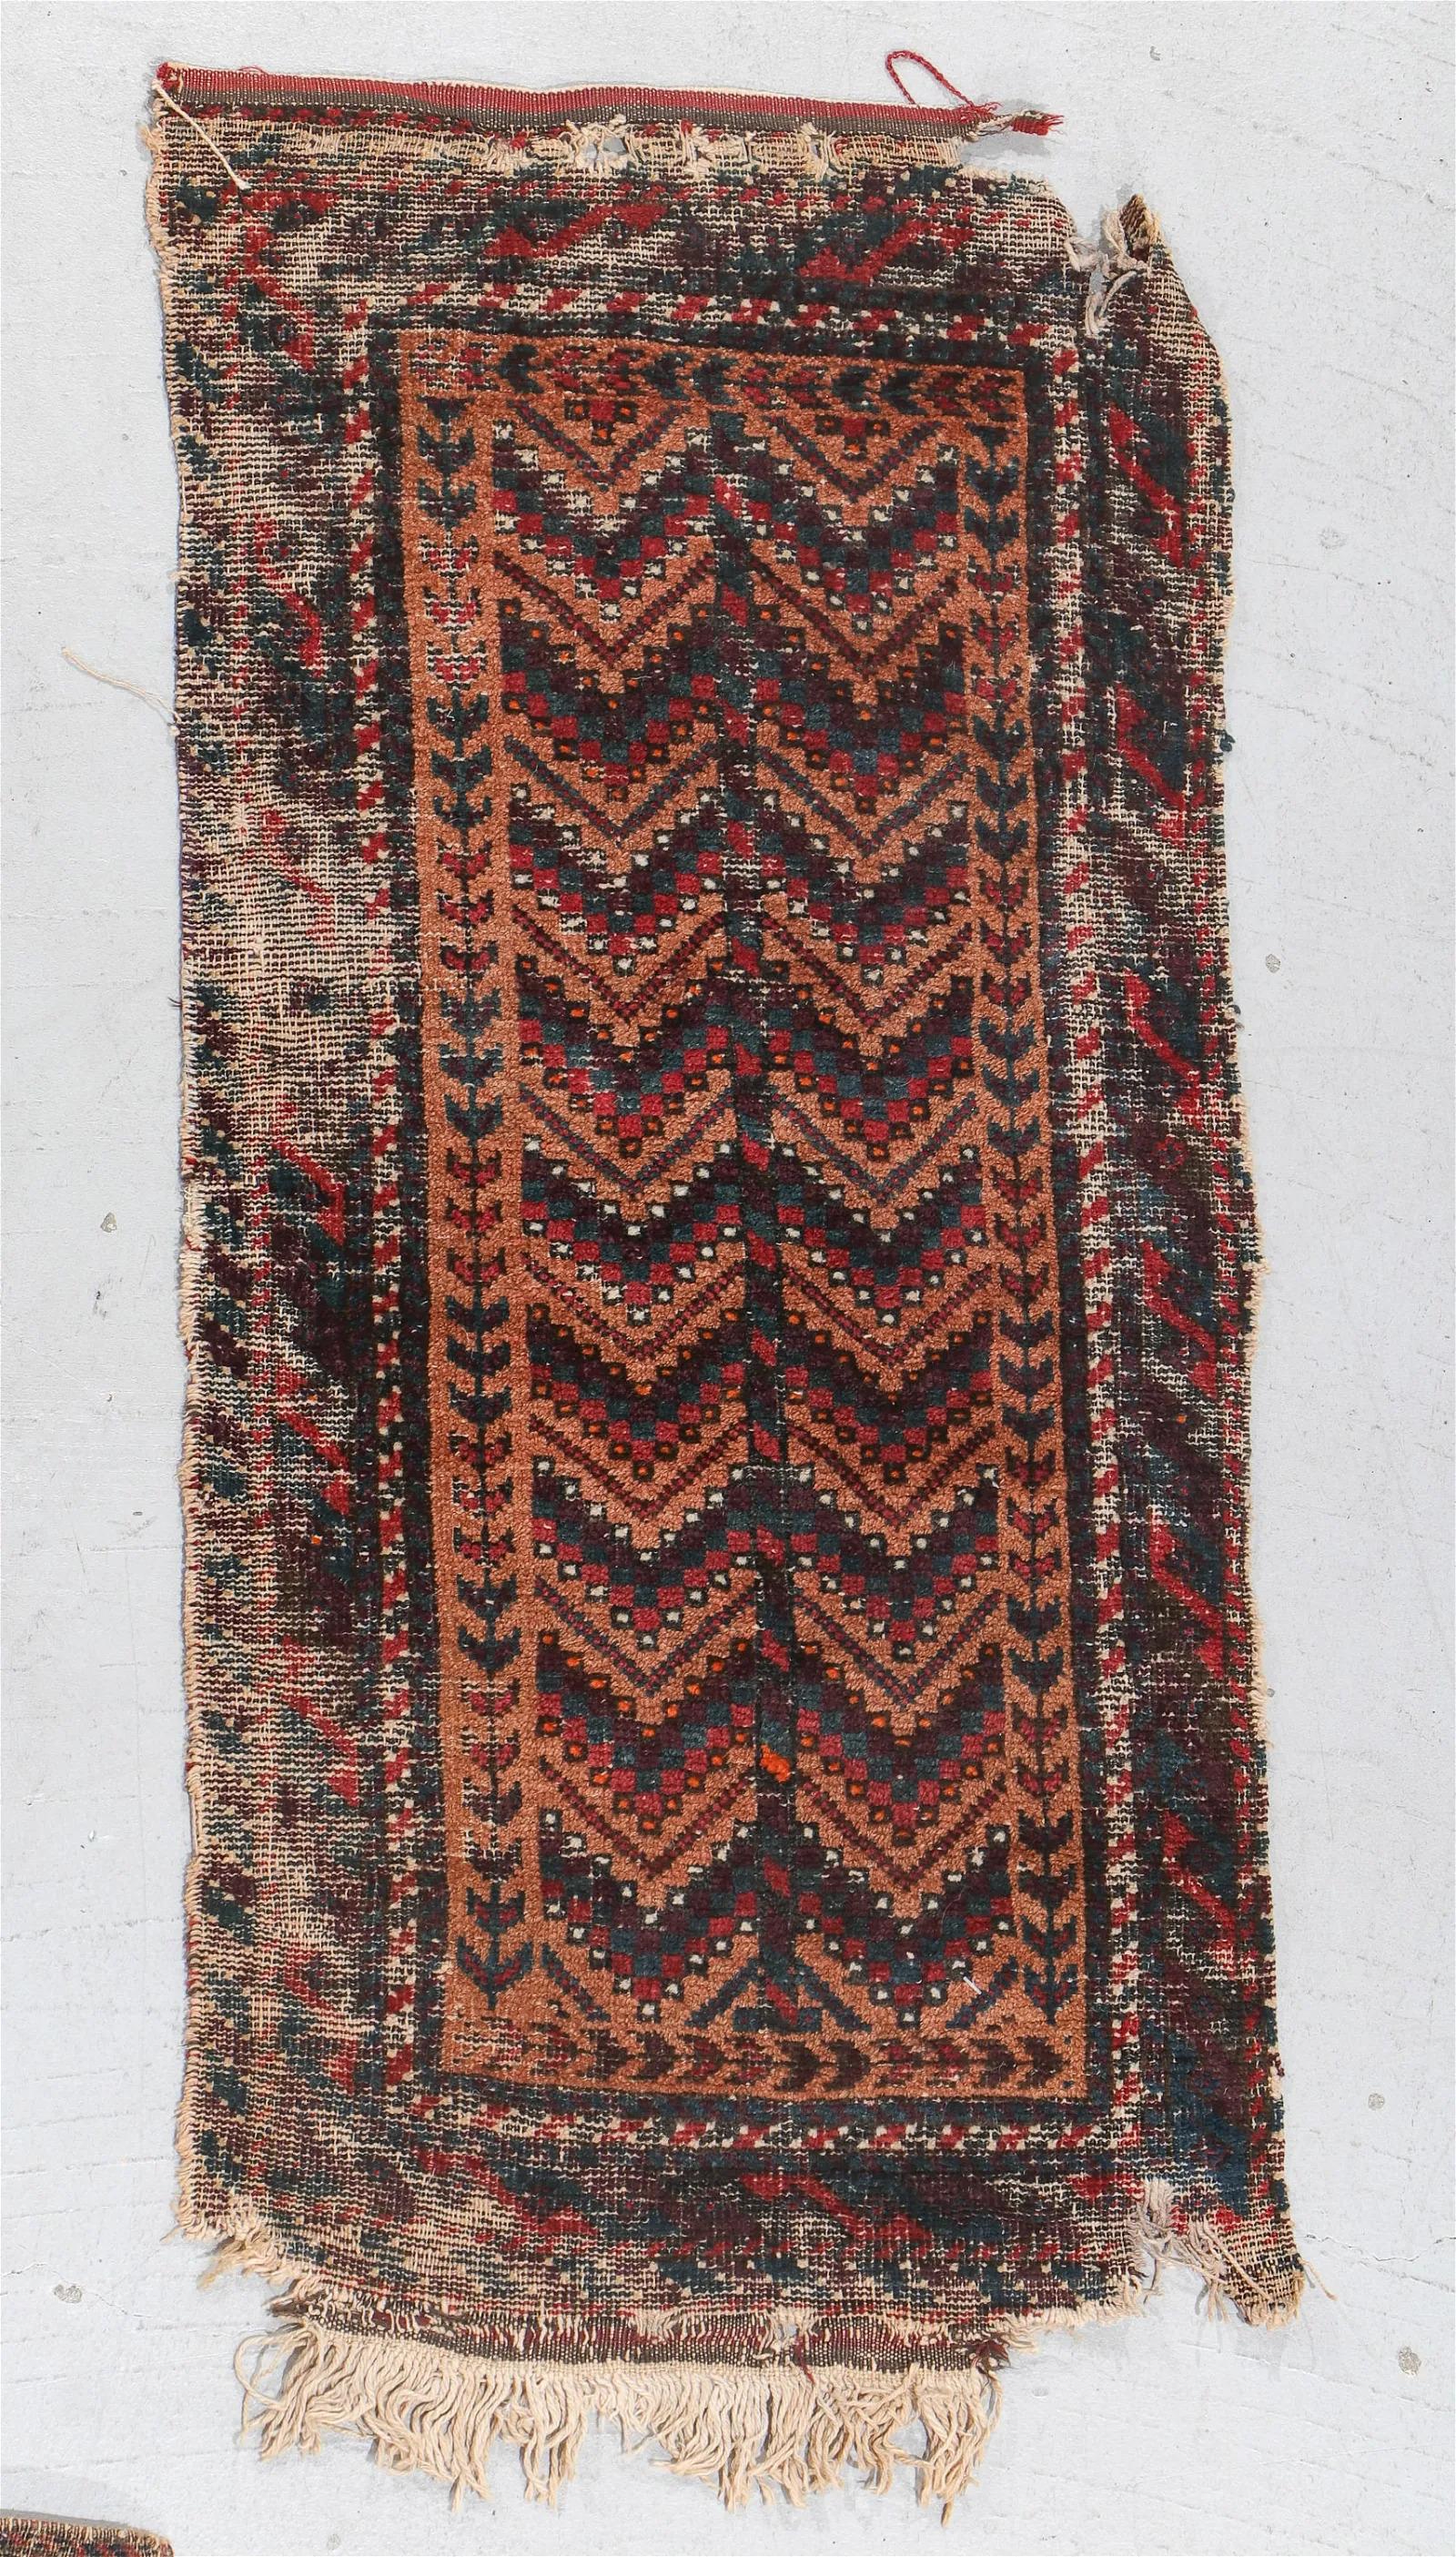 Late 19th Century Lot of 9 Antique Afghan Baluch Collectible Rugs 1.6' x 3.2', 1870s - 2B29 For Sale